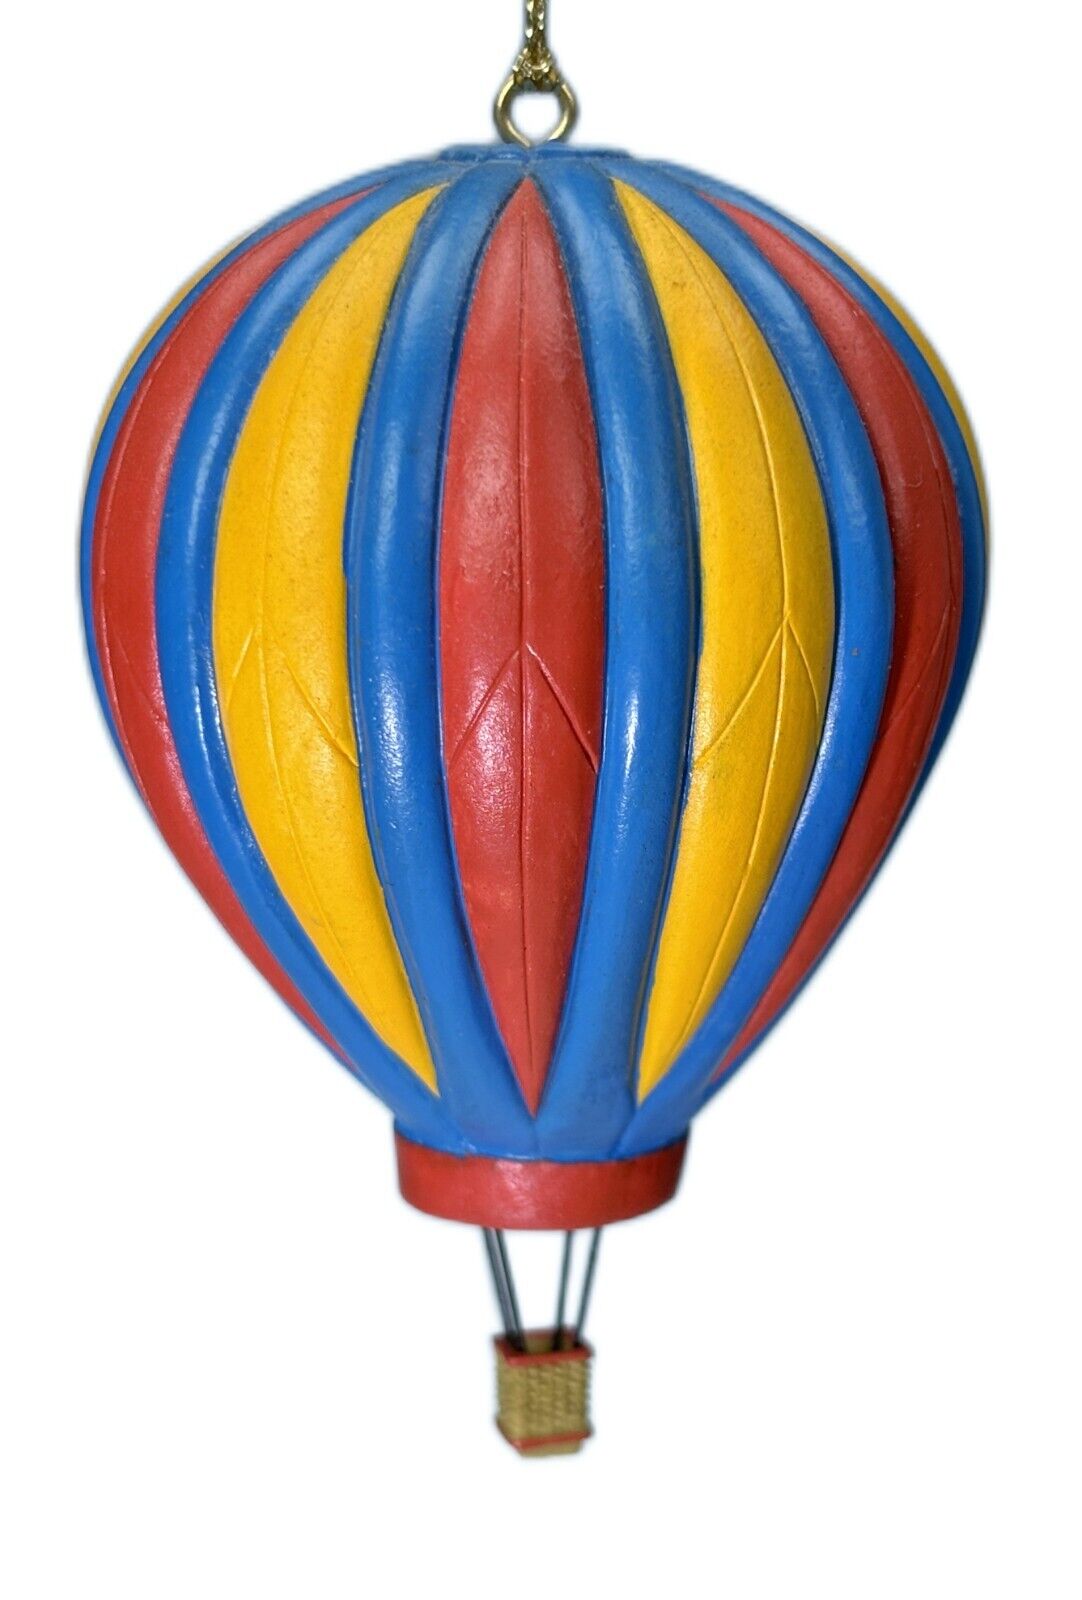 3.5” Hot Air Balloon Painted Wood Christmas Ornament Hanging Blue Yellow Red